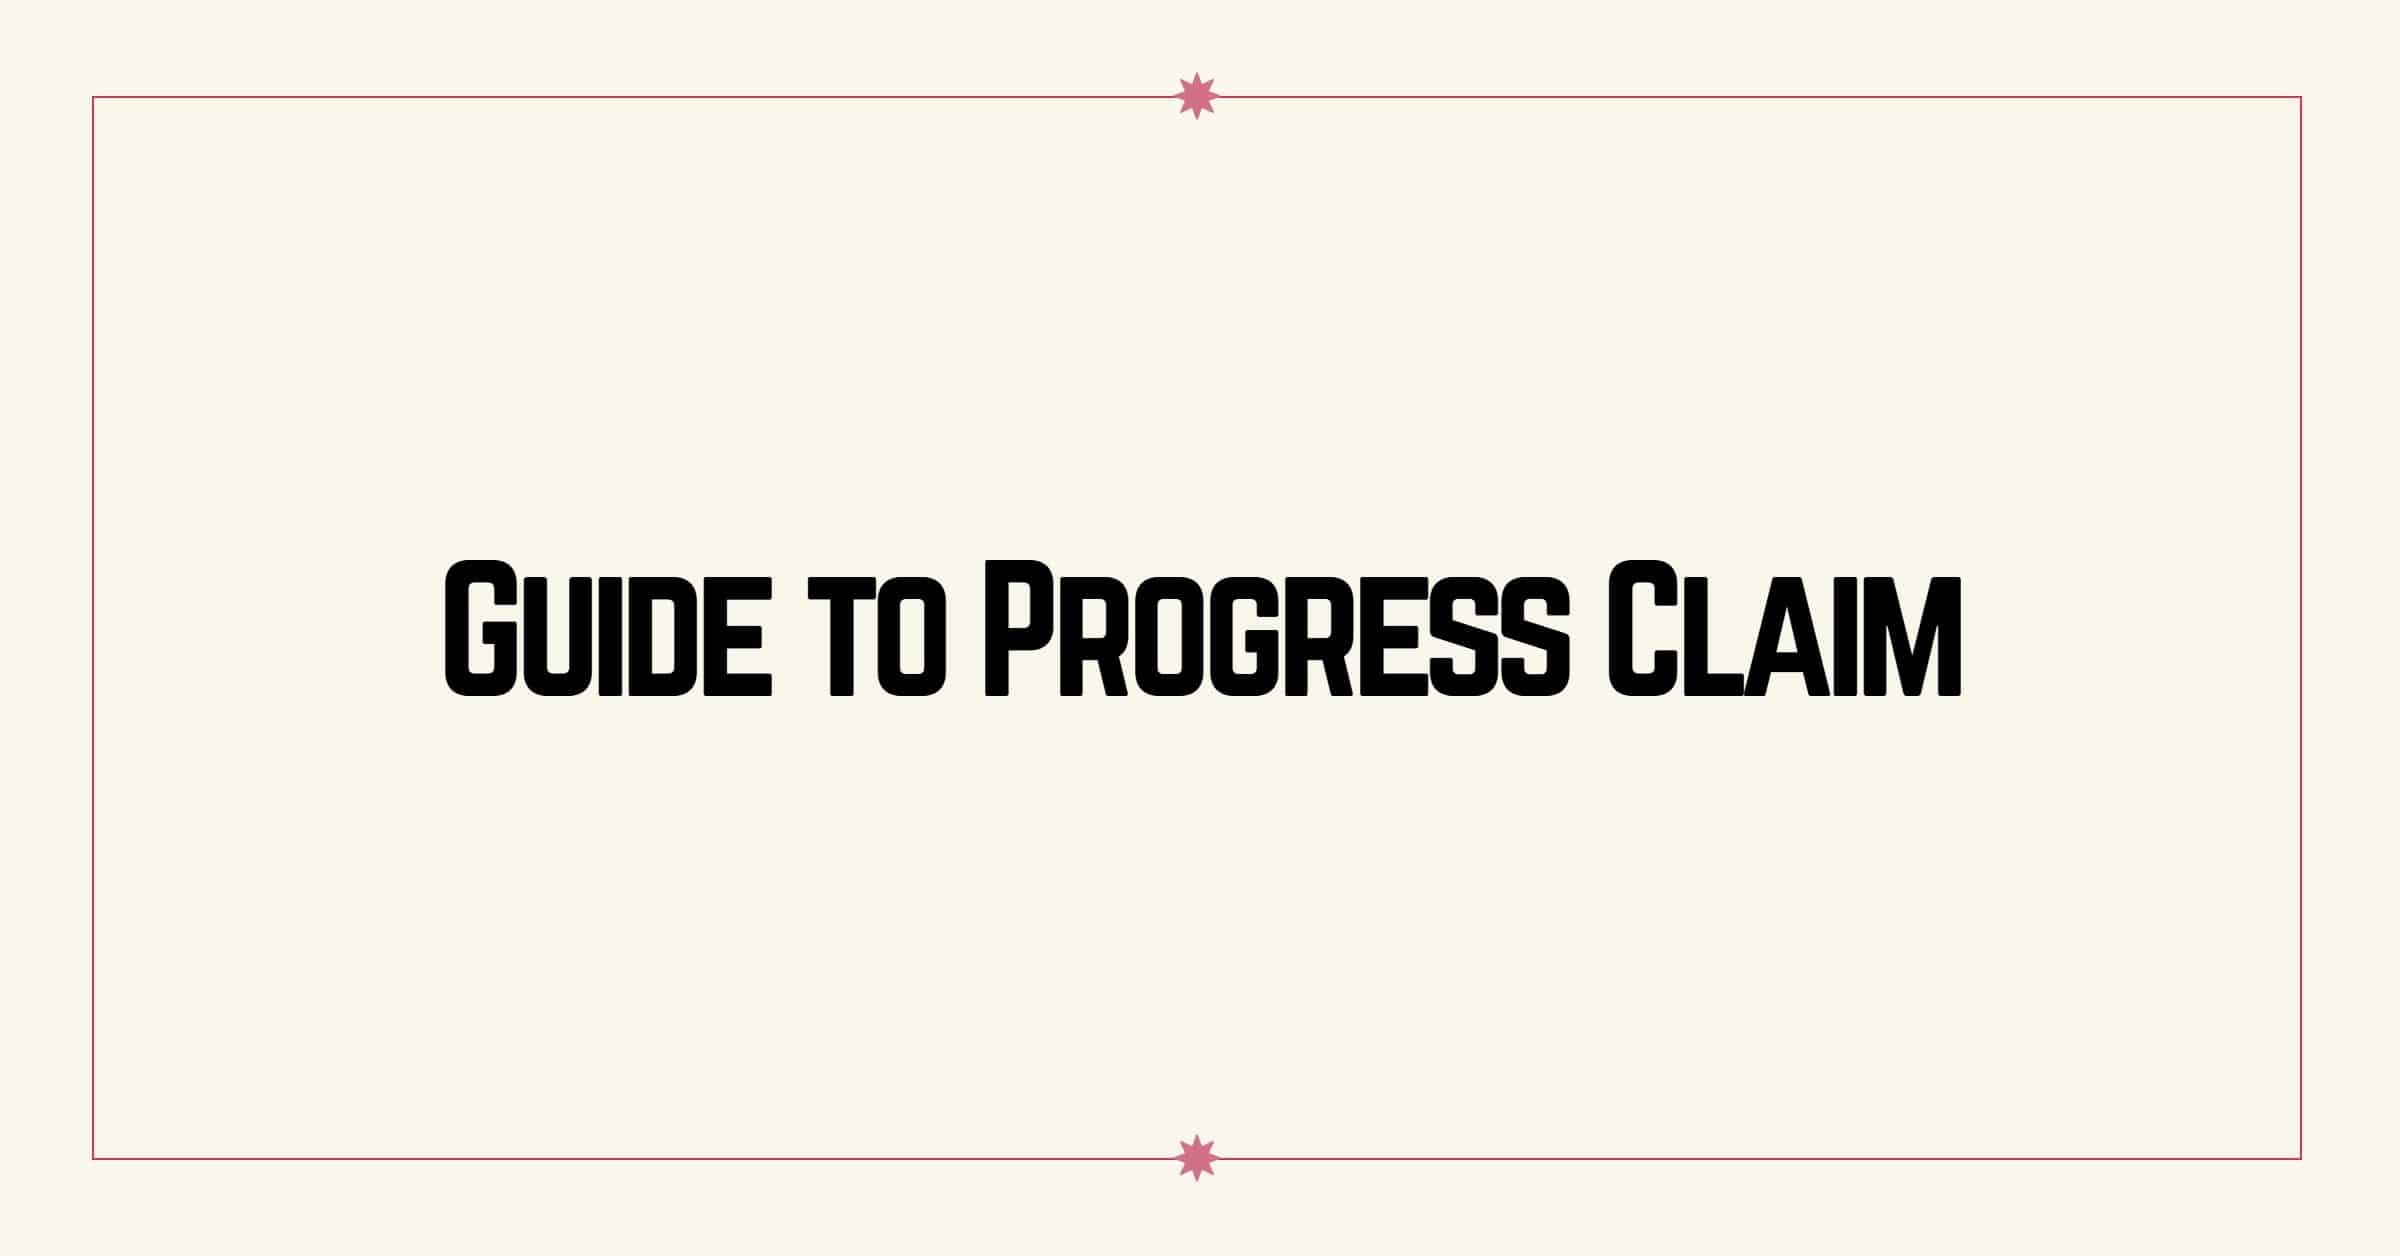 Guide to Progress Claim on Construction Projects